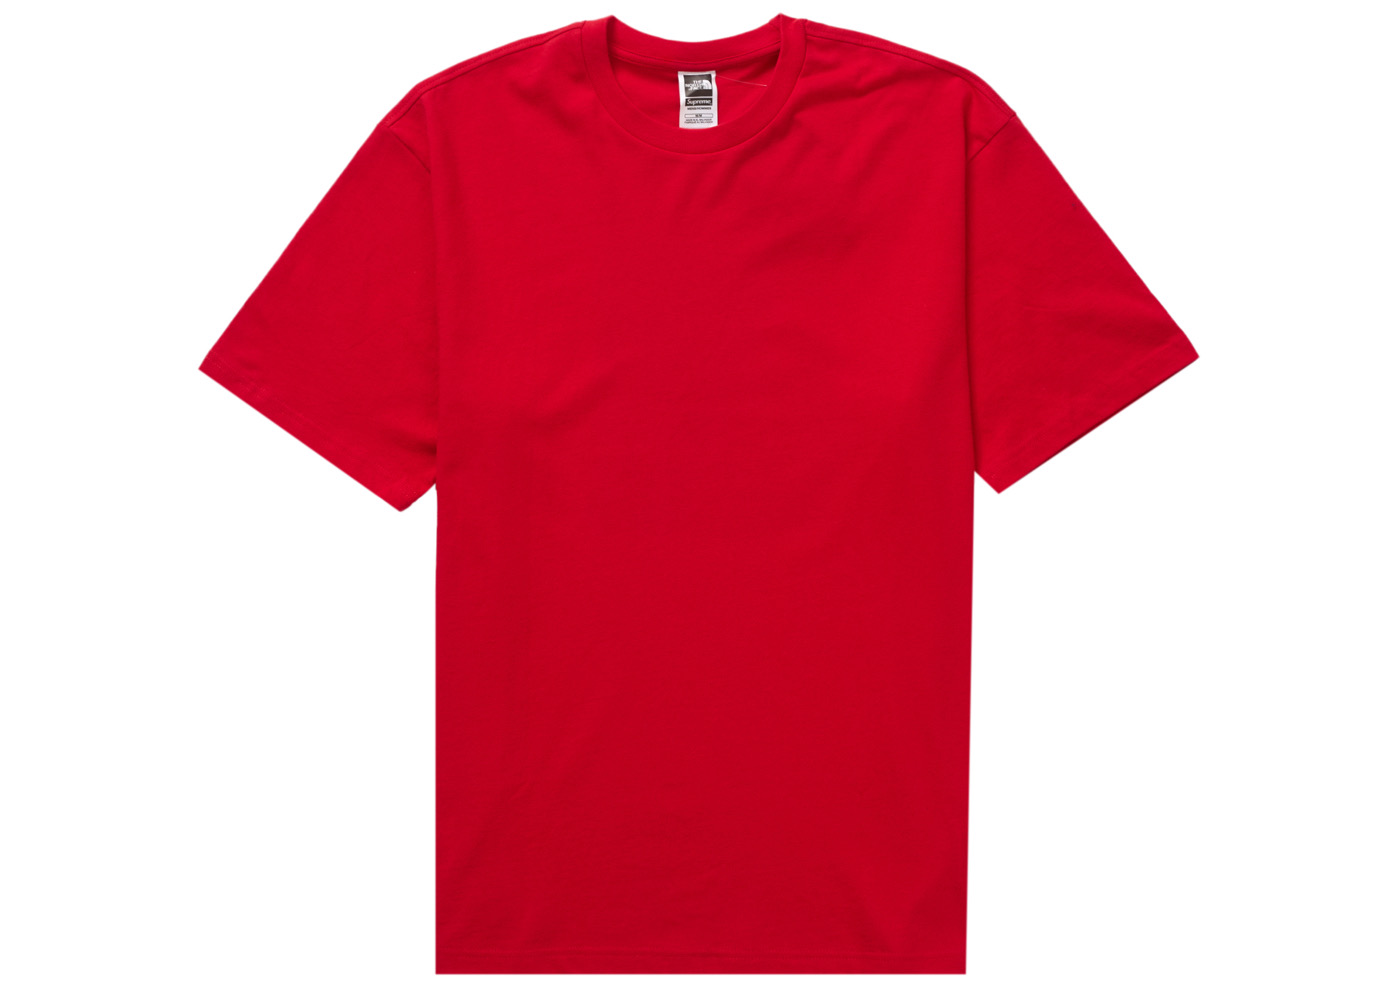 Supreme The North Face S/S Top Red